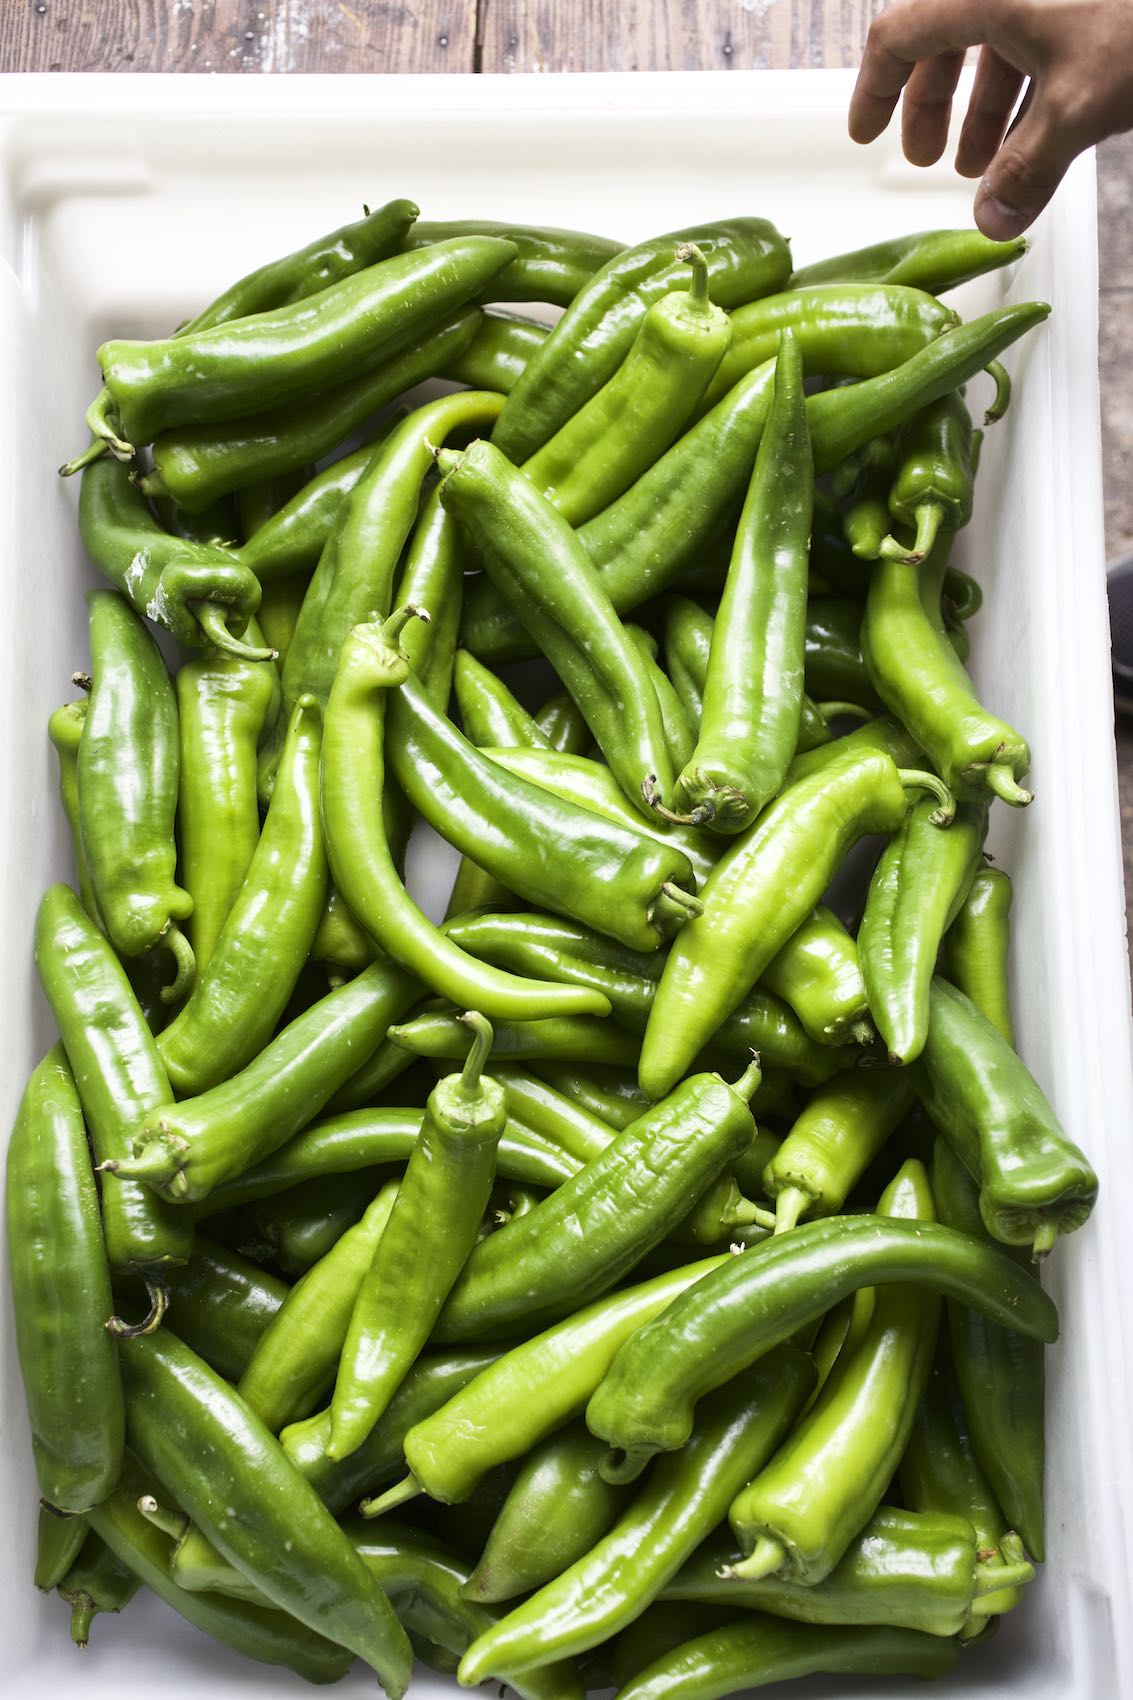 Jody Horton Photography - Fresh, green chili peppers piled together while a hand reaches for them. 